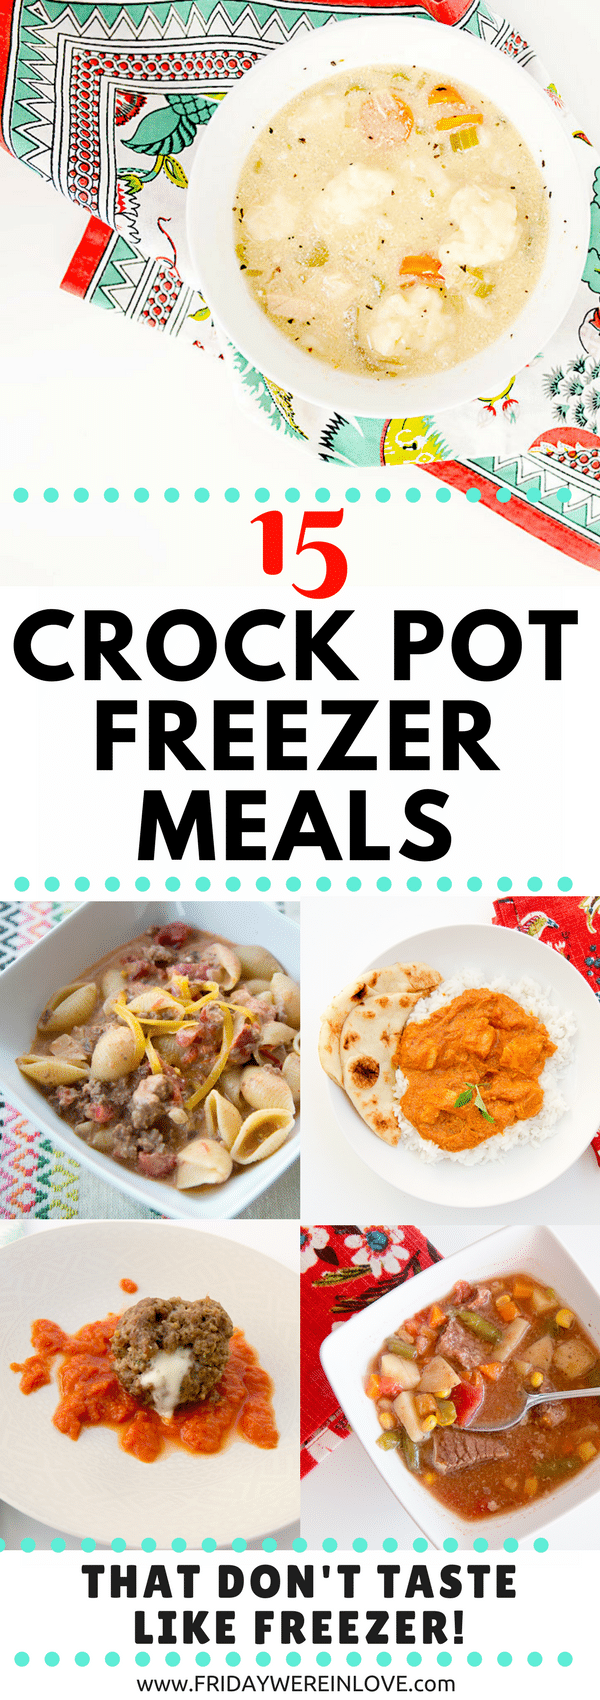 15 Crock pot freezer meals that don't taste like freezer! These slow cooker freezer meal recipes are favorites the whole family will love.